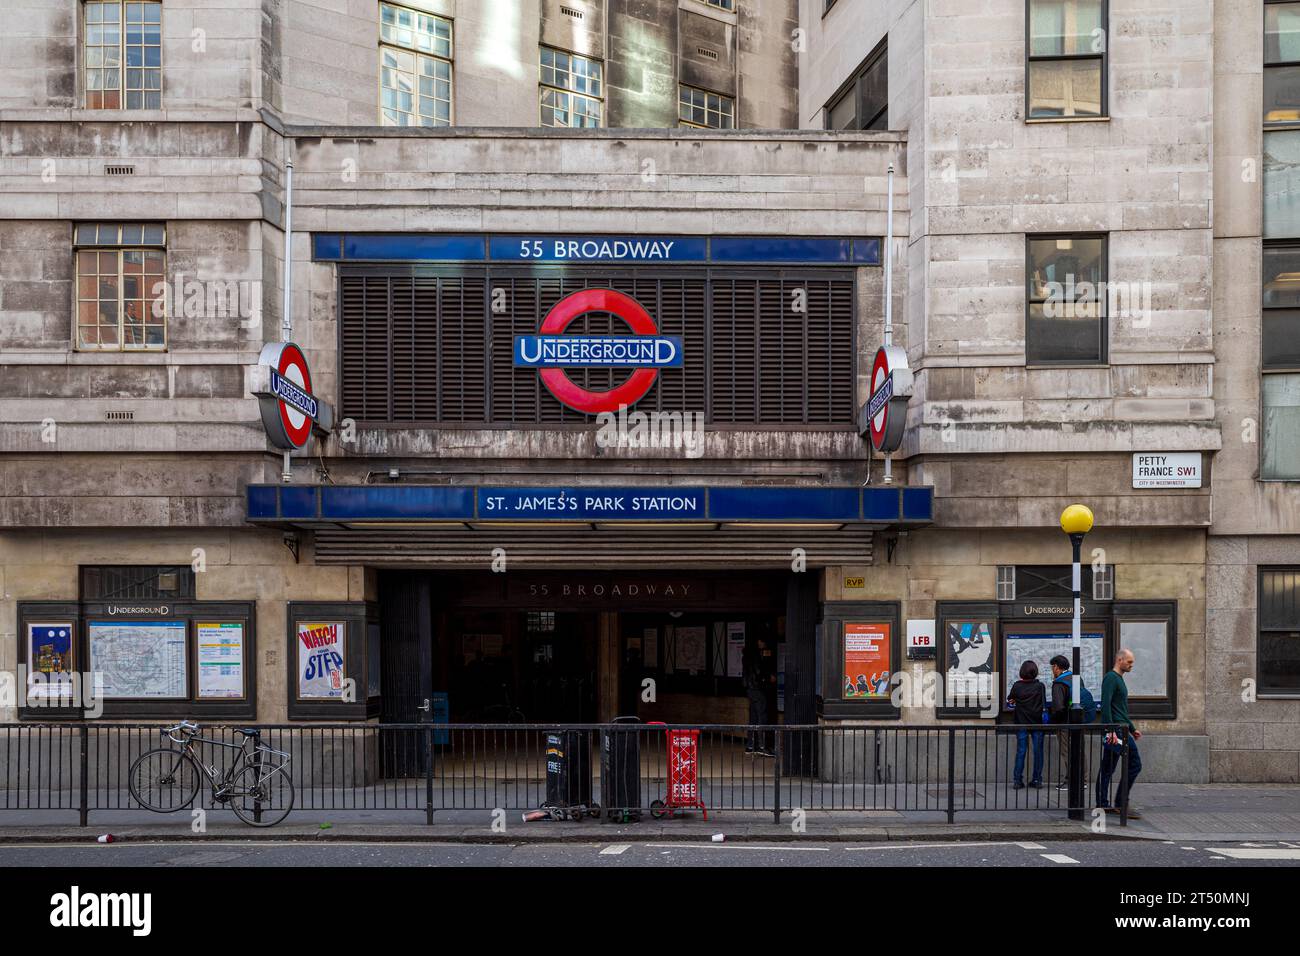 St. James's Park Underground Station at 55 Broadway Westminster London. Opened 24th December 1868. Stock Photo